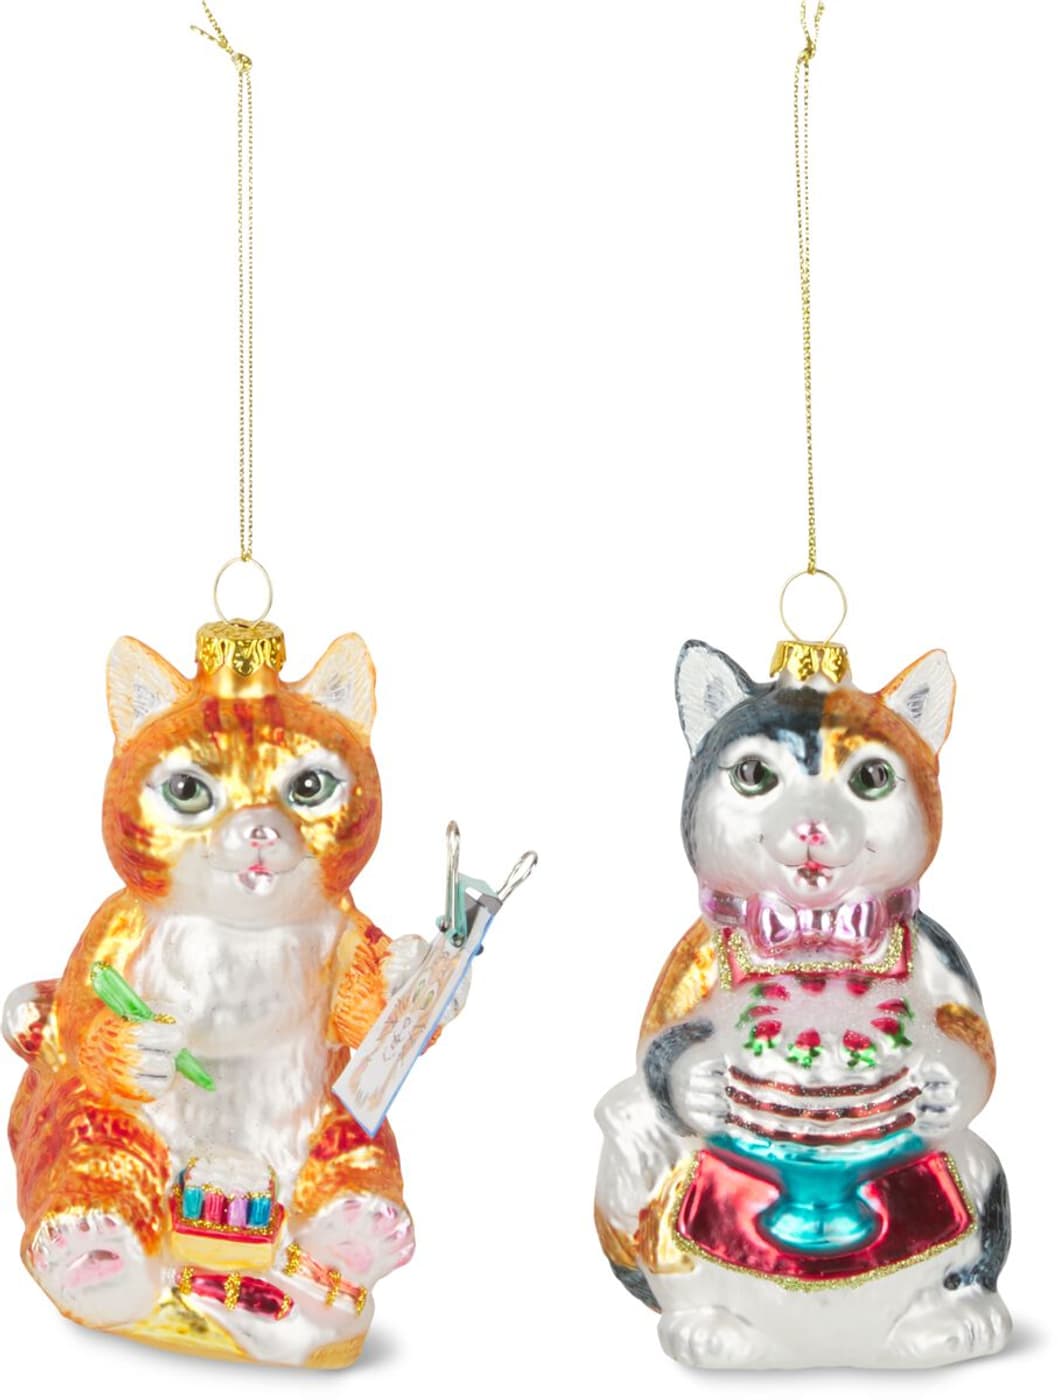 Noel By Ambiance Decoration En Verre A Suspendre Chat Migros